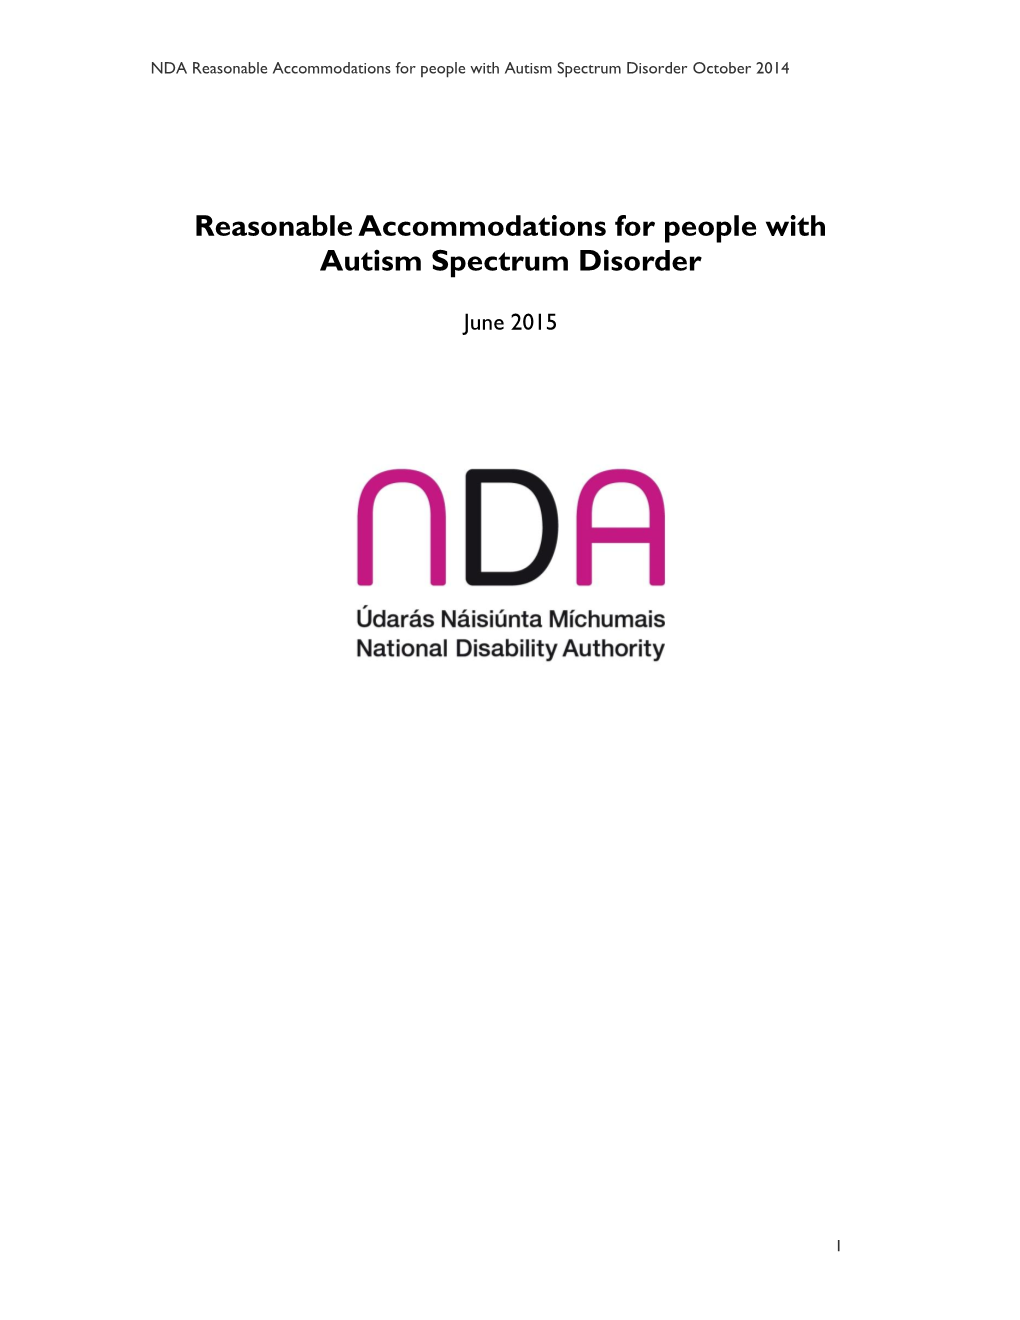 Reasonable Accommodations for People with Autism Spectrum Disorder October 2014